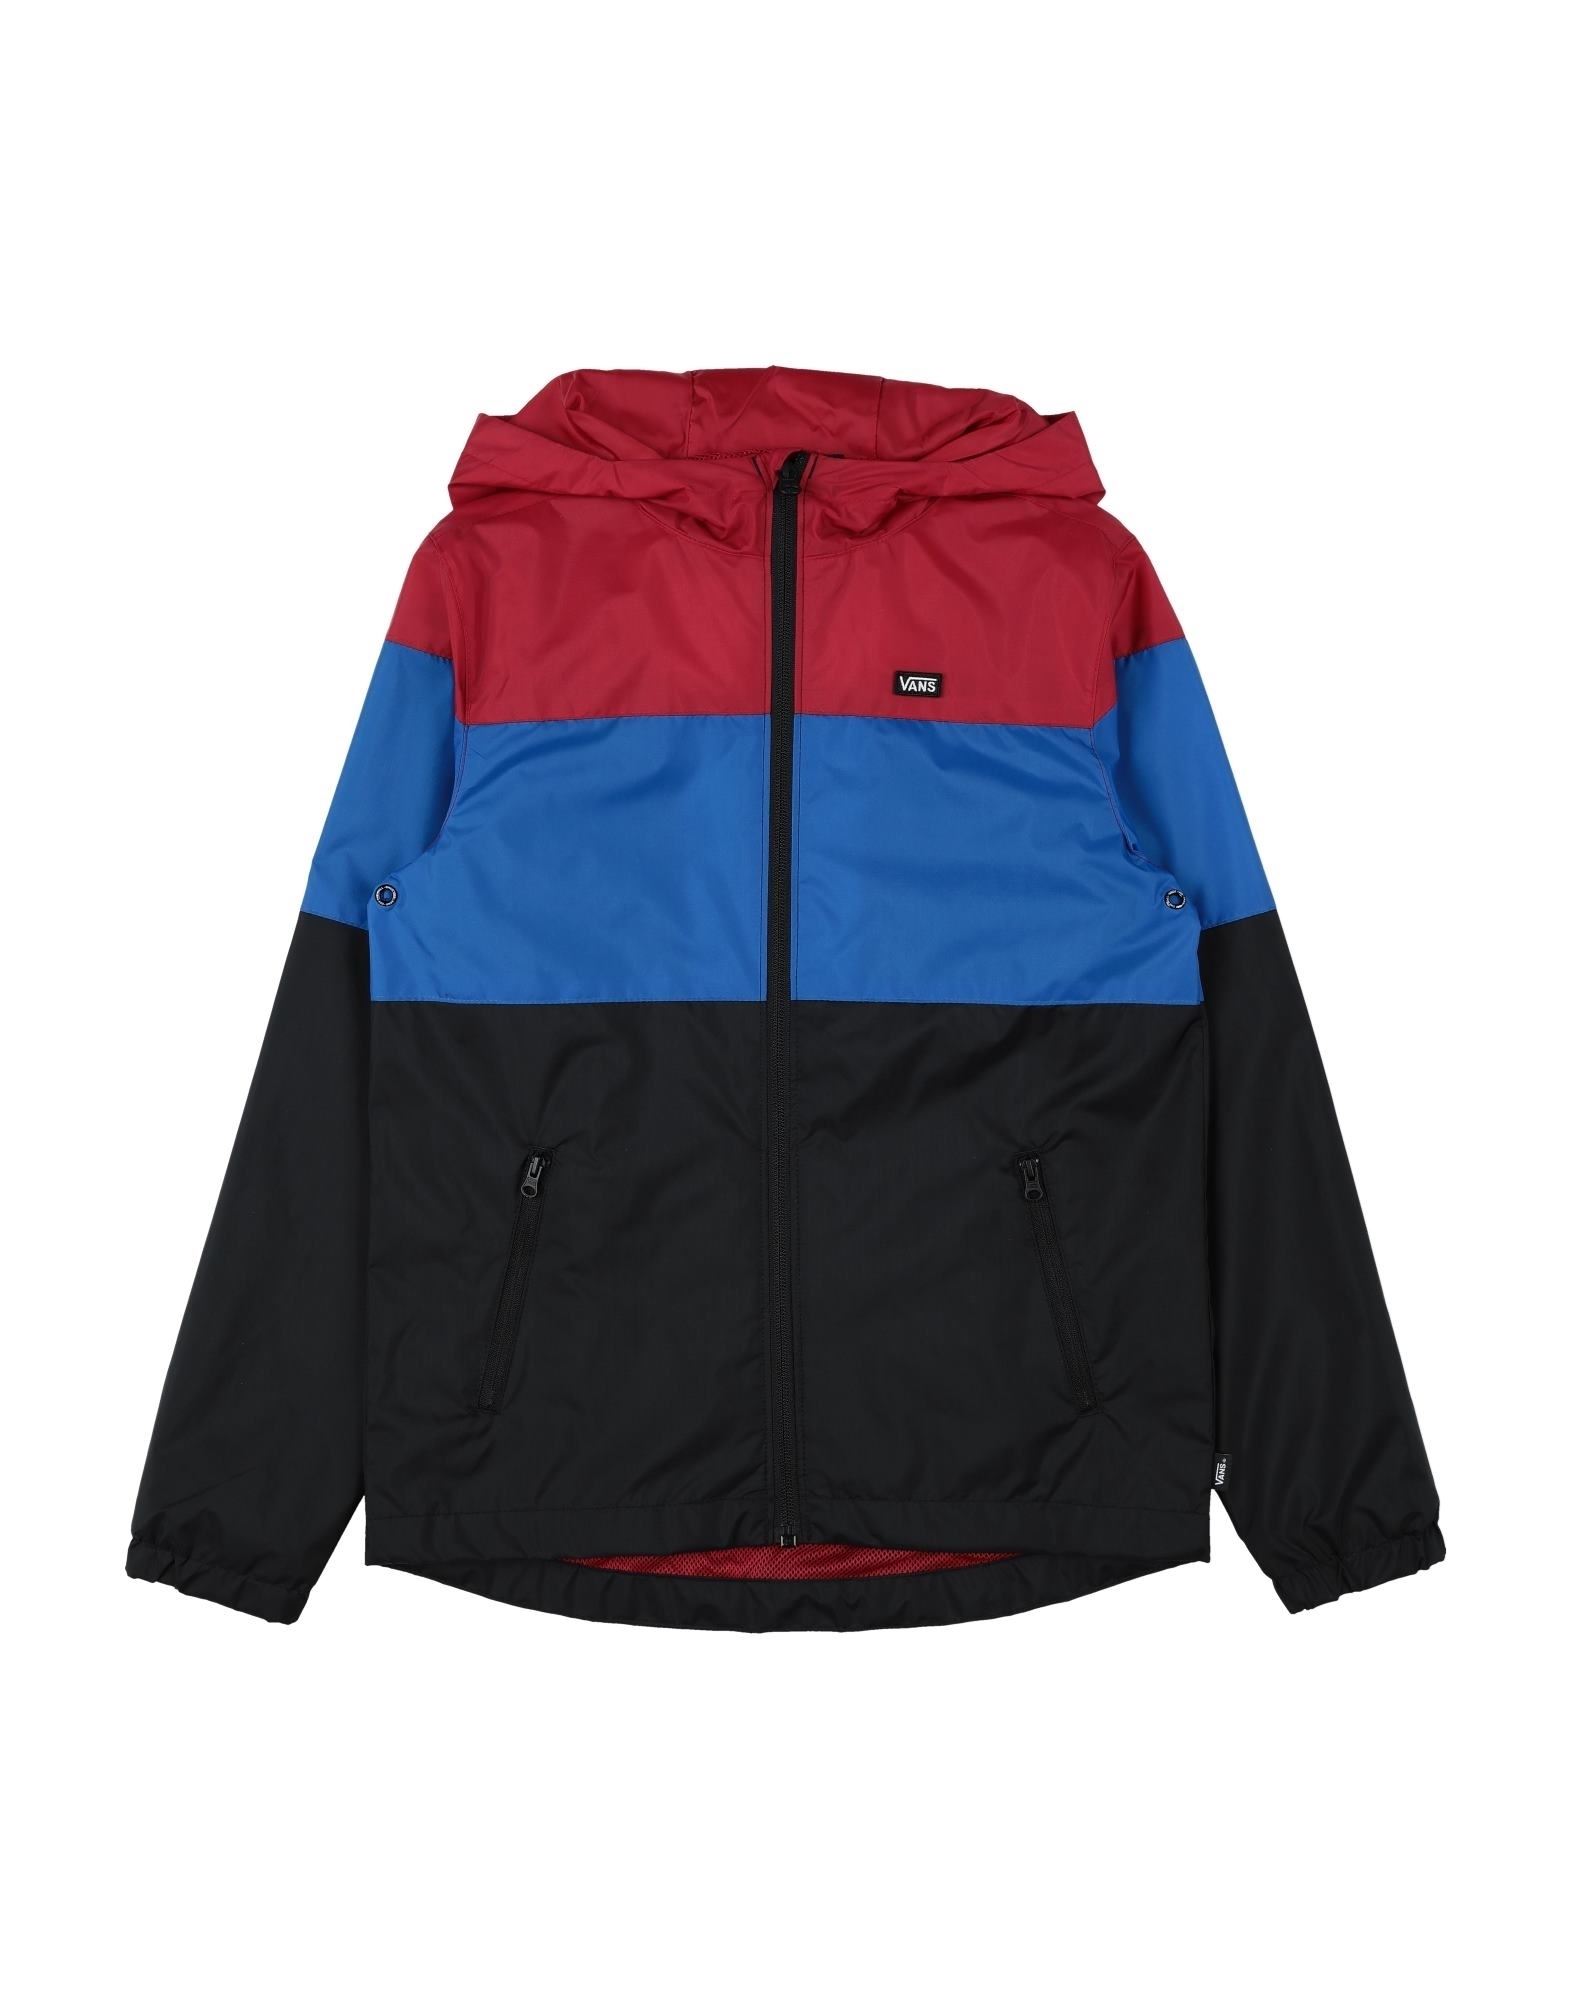 ＜YOOX＞ ★27%OFF！VANS ボーイズ 9-16 歳 ブルゾン レッド 10 ナイロン 100% BY BARRED WINDBREAKER BOYS画像